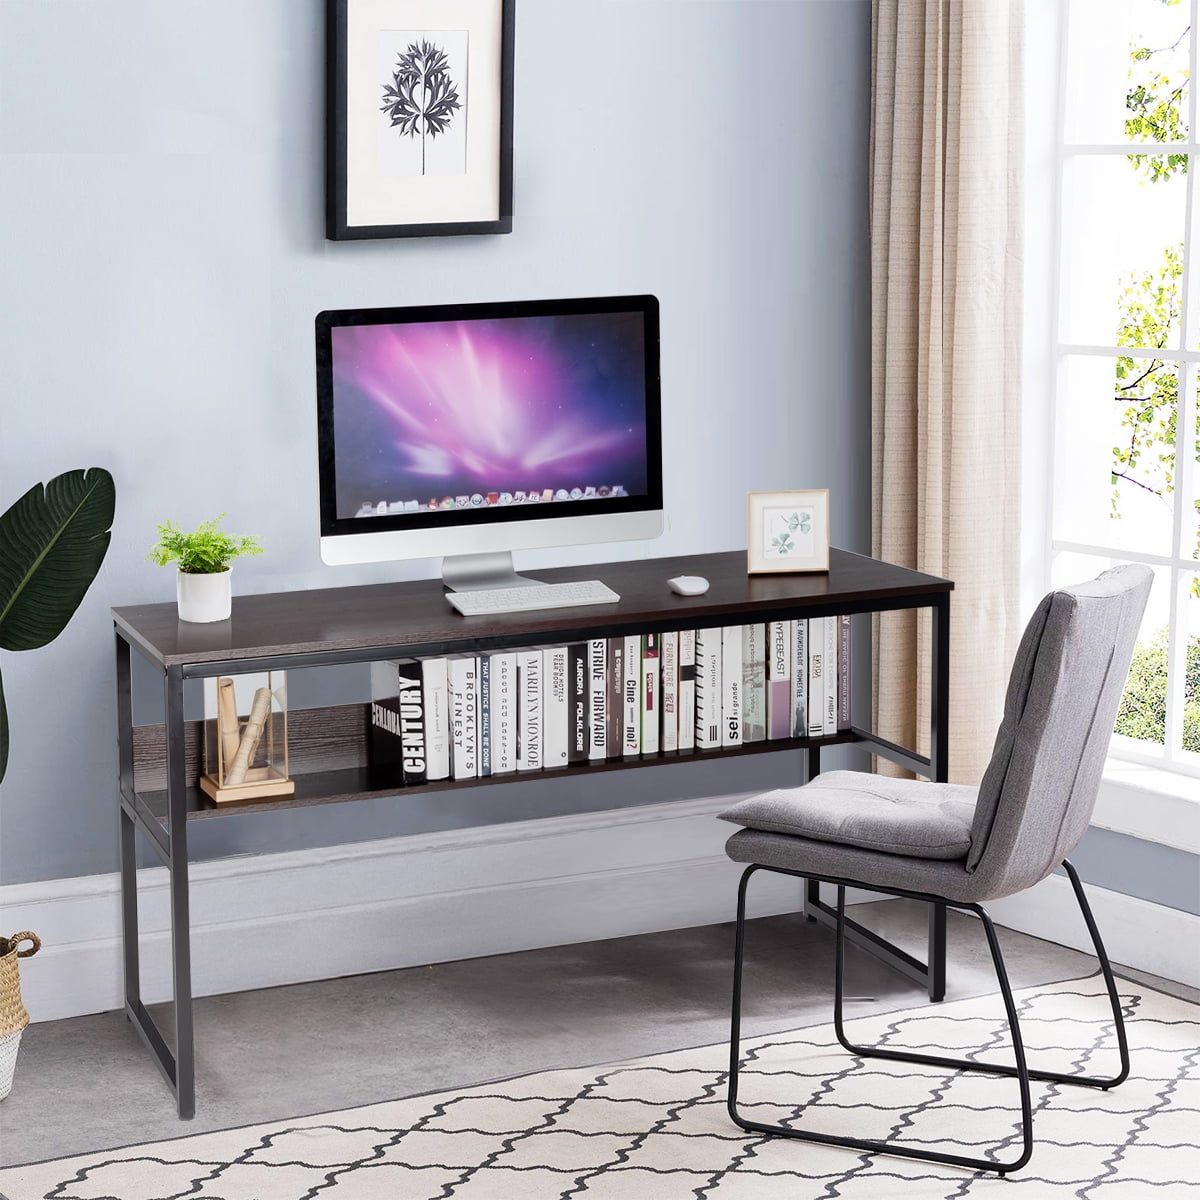 Office Computer Table,100 * 55cm Study Writing Desk,Simple Style